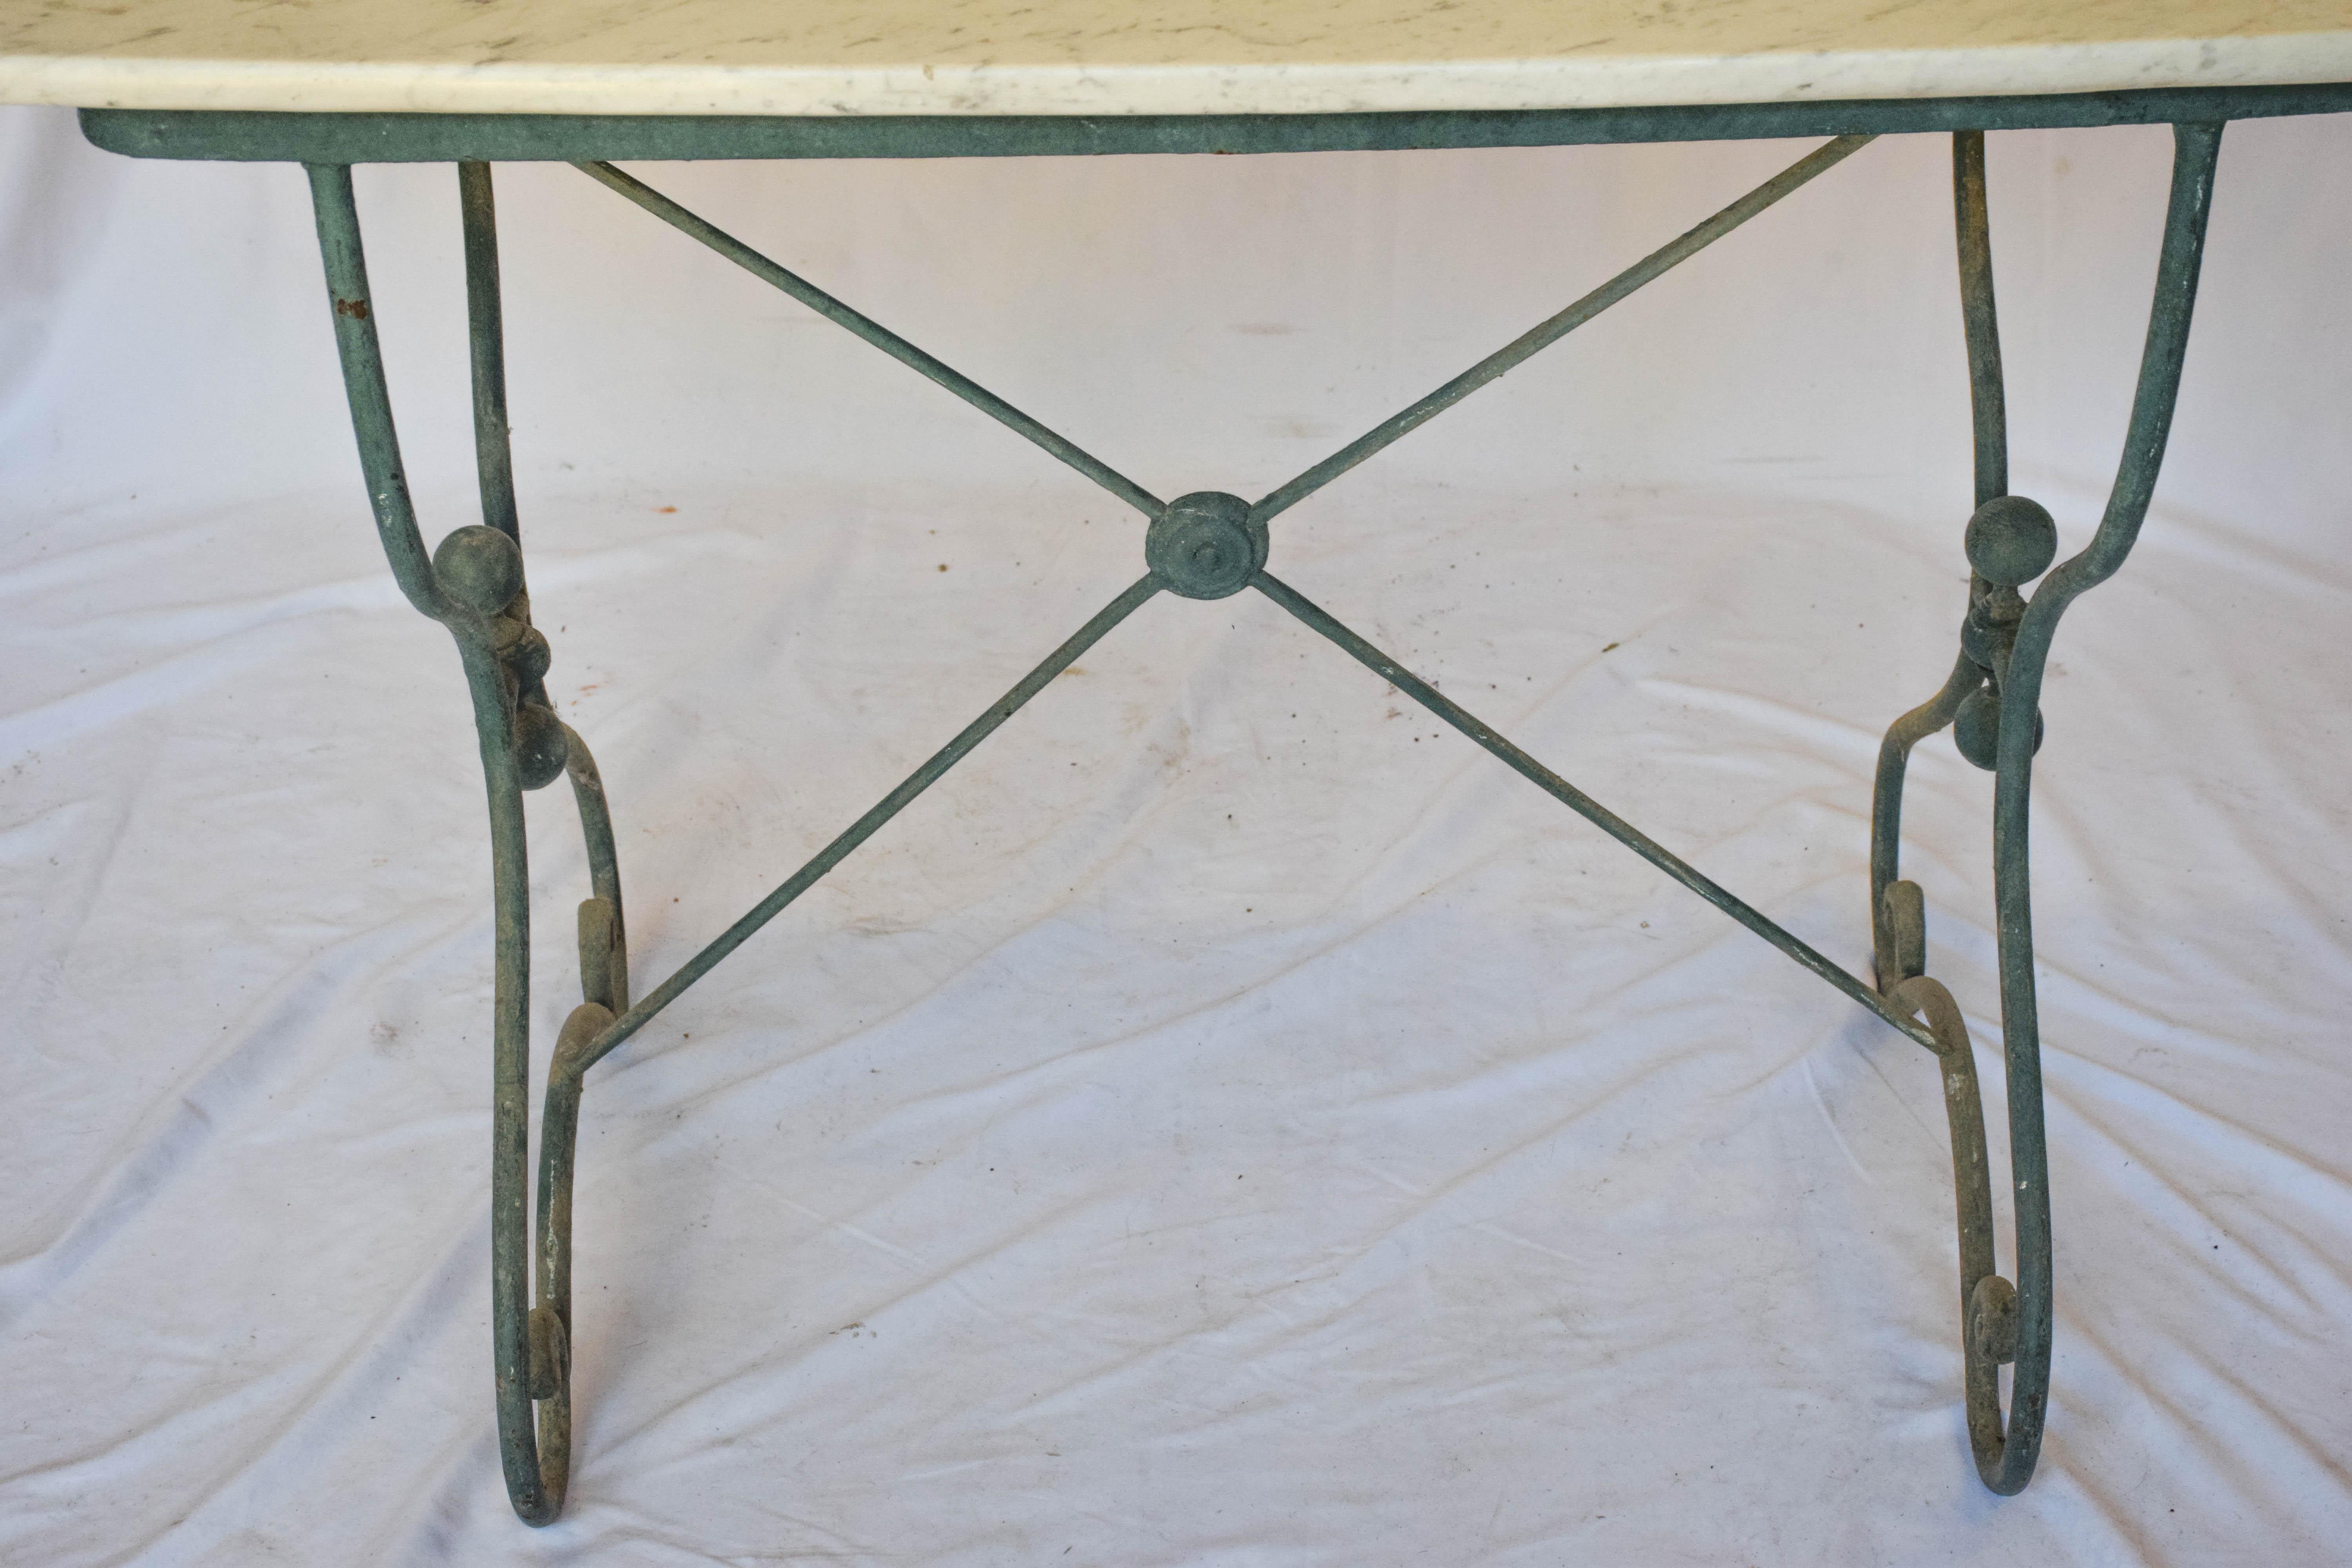 Early 20th century French Bistro table with marble top. This table has a very nice patina and would work well indoors or out. Could be charming used as a small breakfast table or in a powder back with a sink installed on top.

20